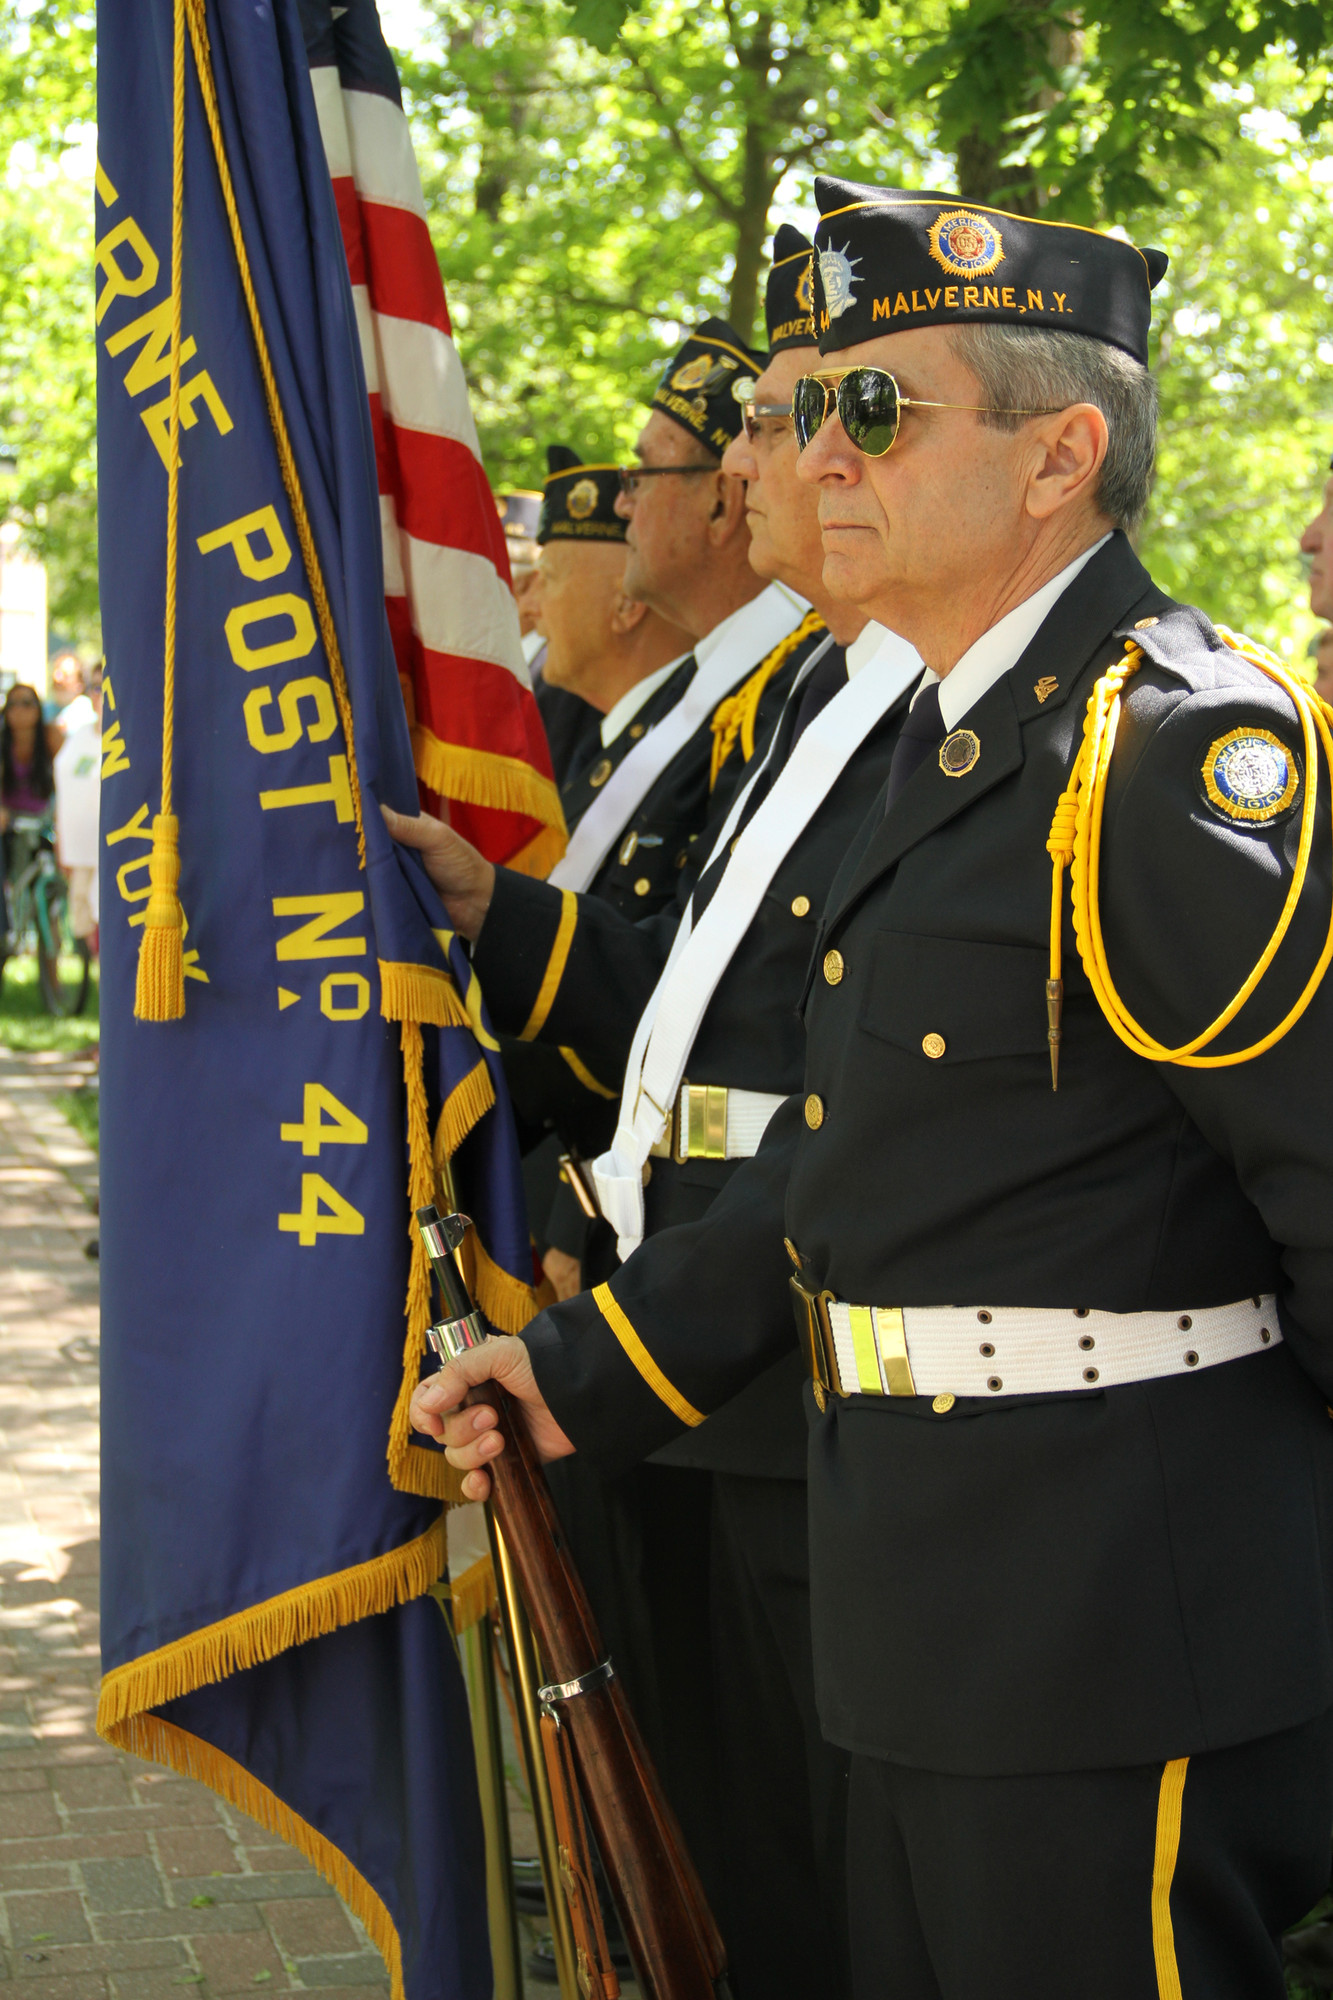 The Color Guard stands at attention during the ceremony.